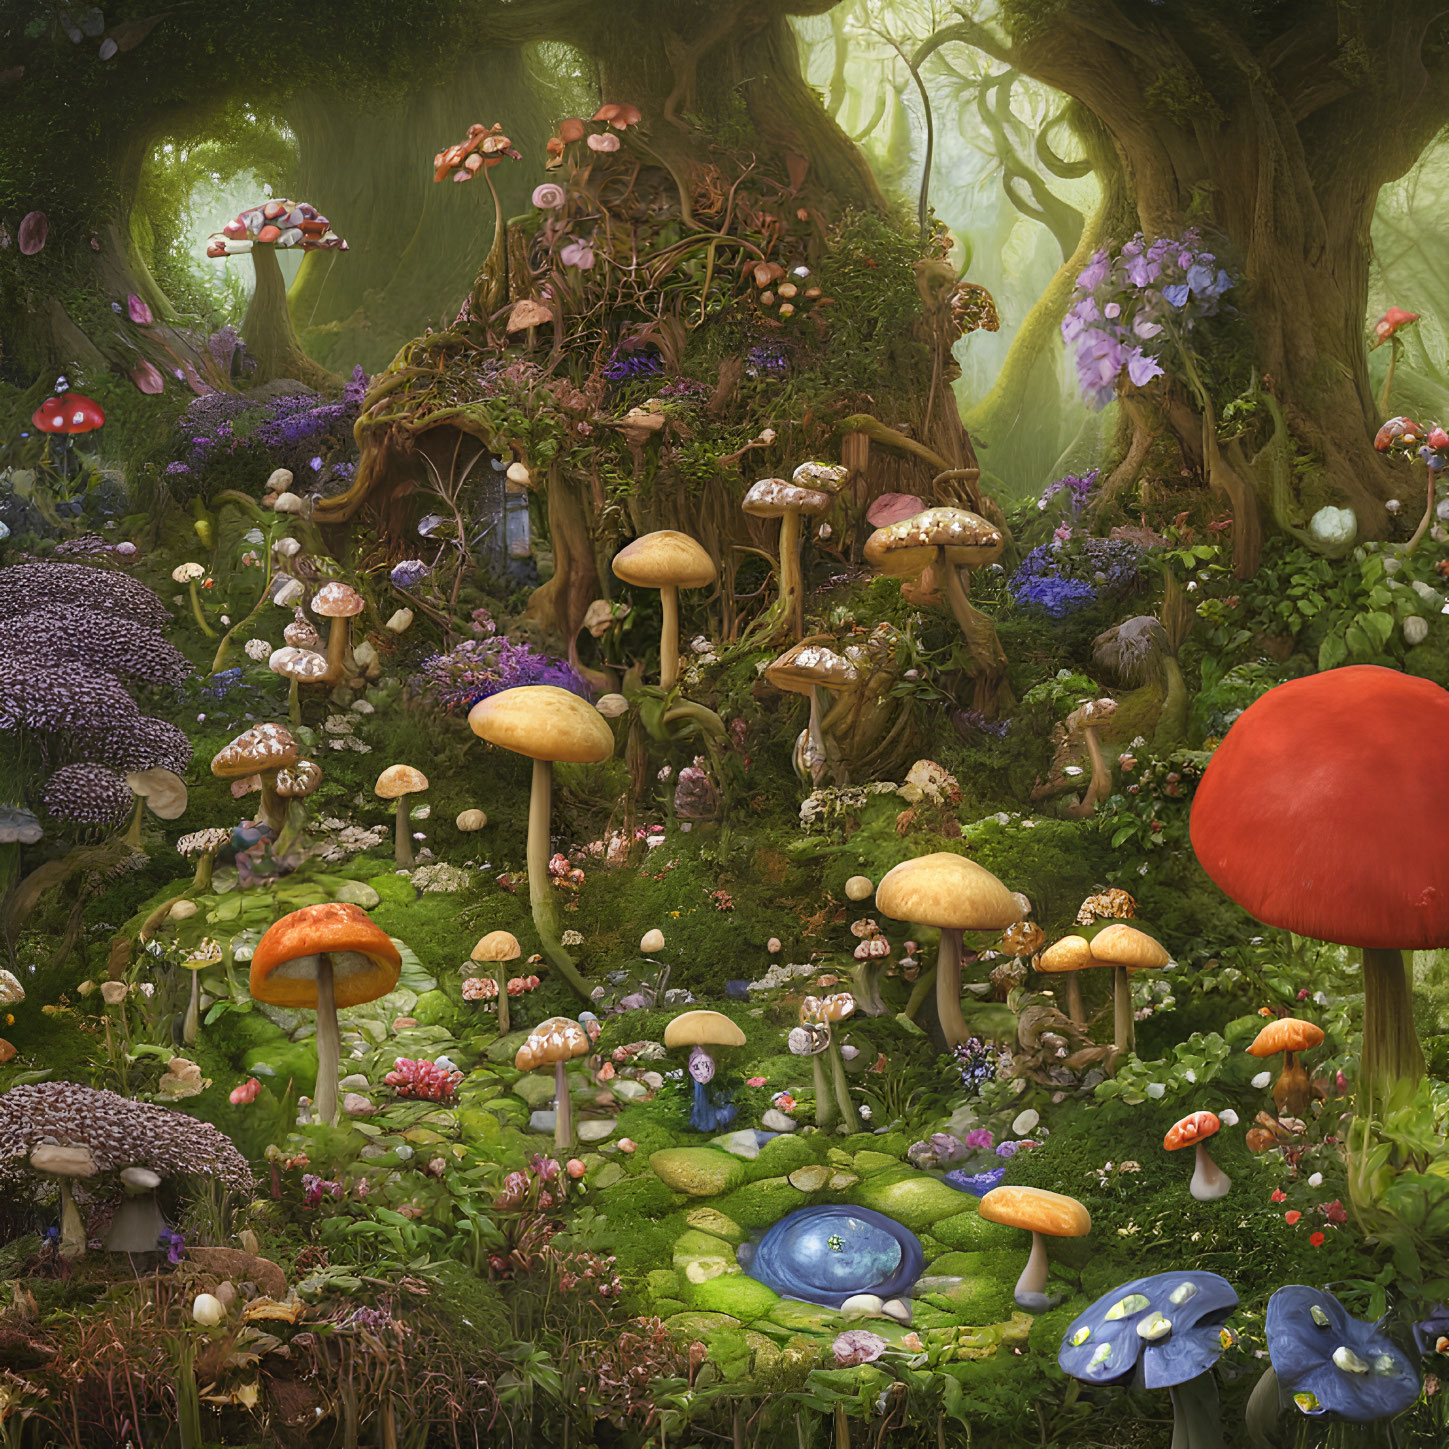 Colorful Mushroom Forest with Whimsical Tree Houses